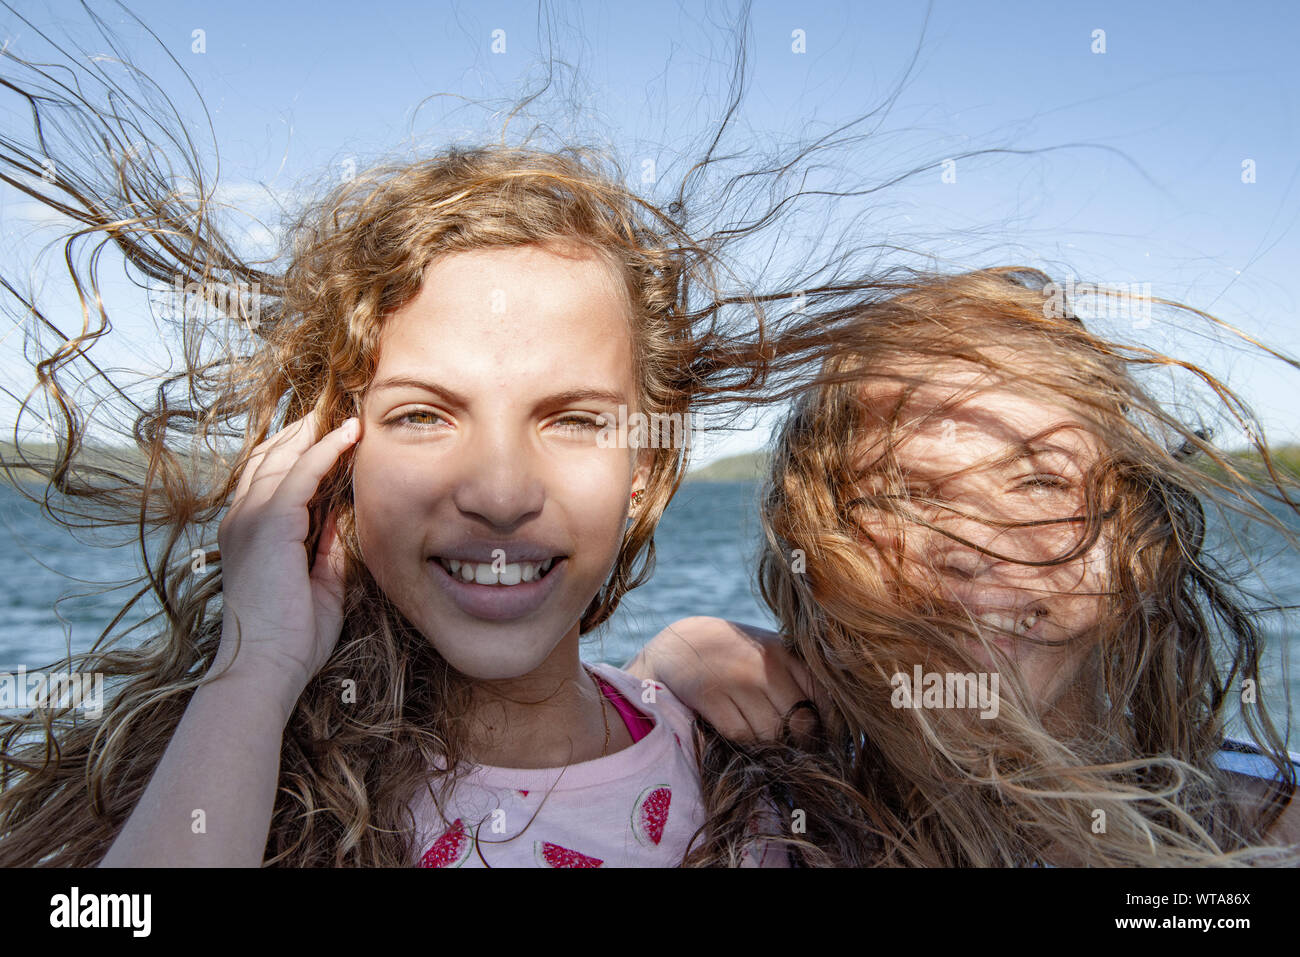 Disheveled hair twins smiling during strong gale Stock Photo